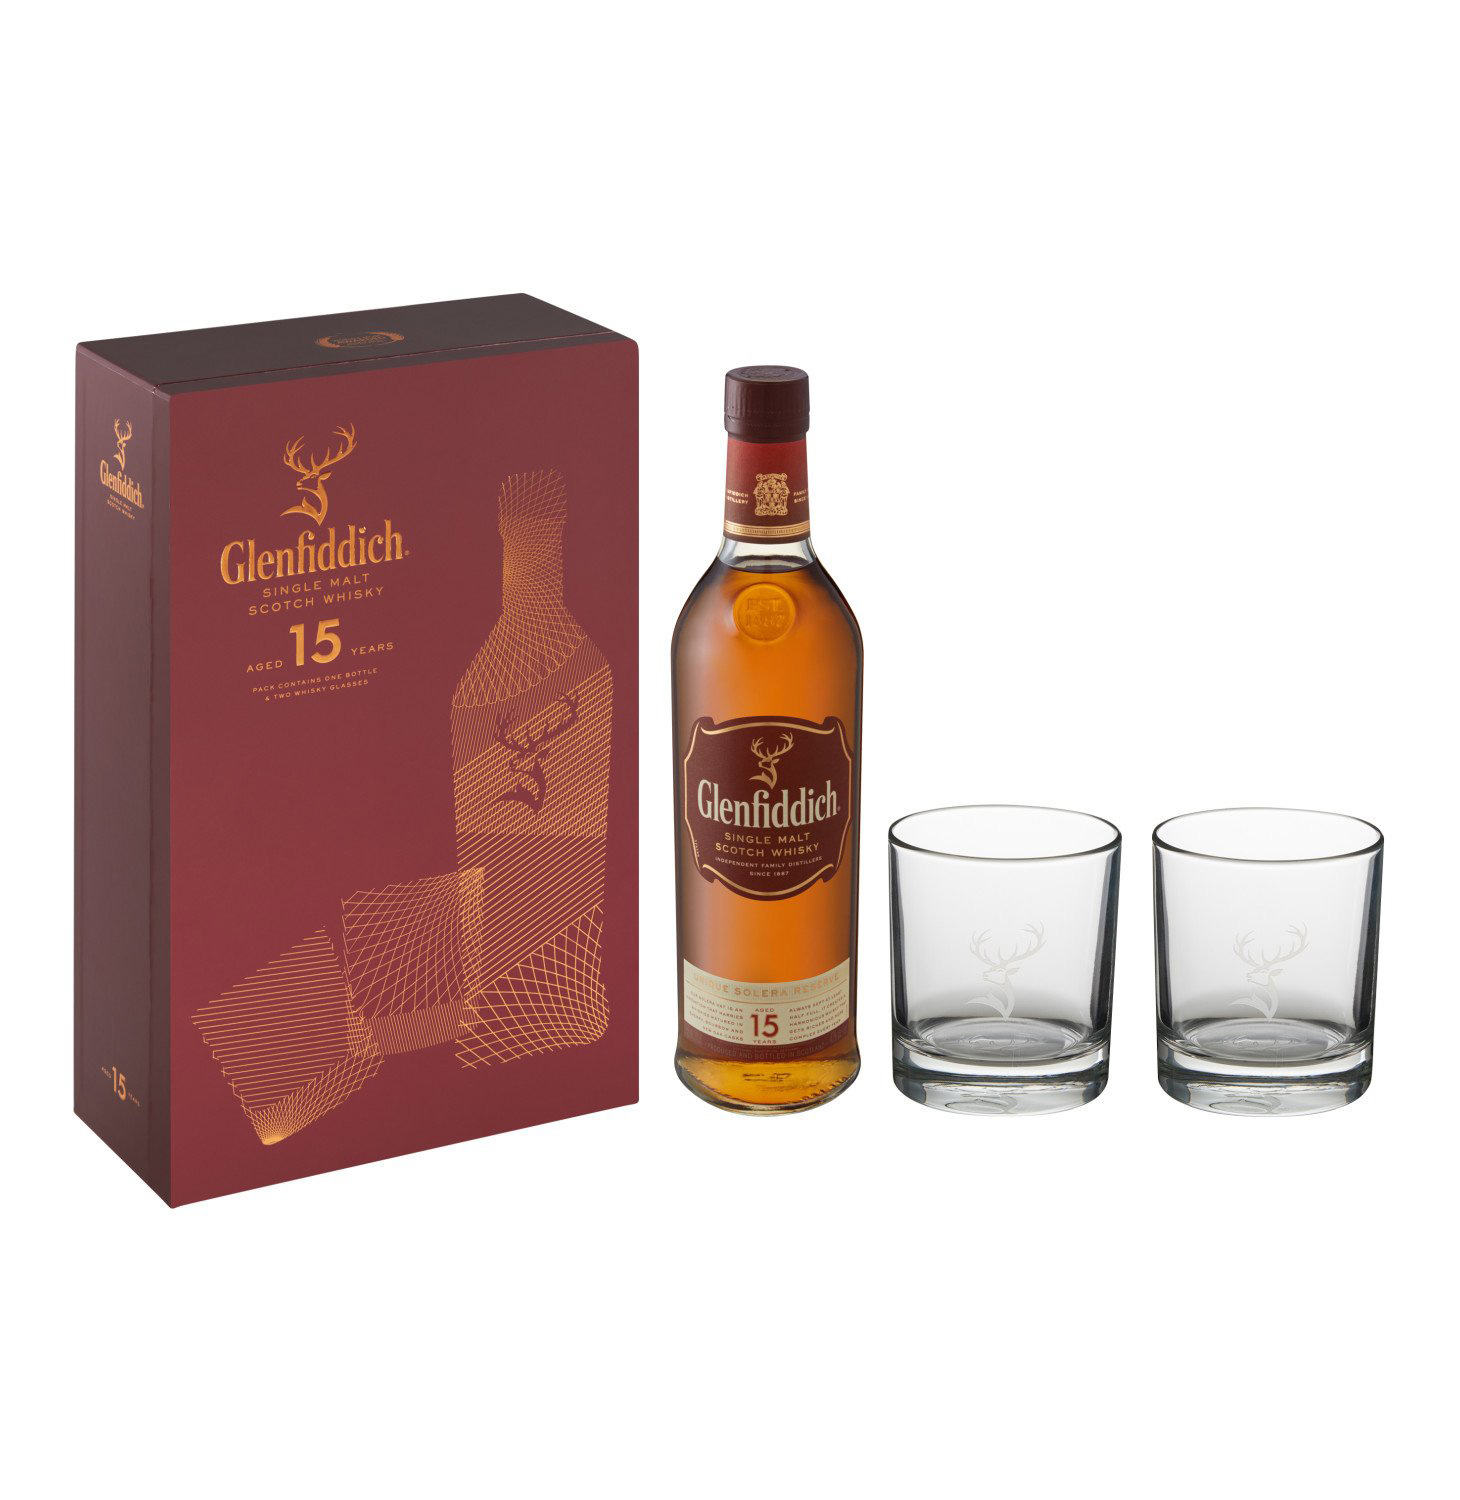 Glenfiddich 15 Year Old Whisky Gift Box